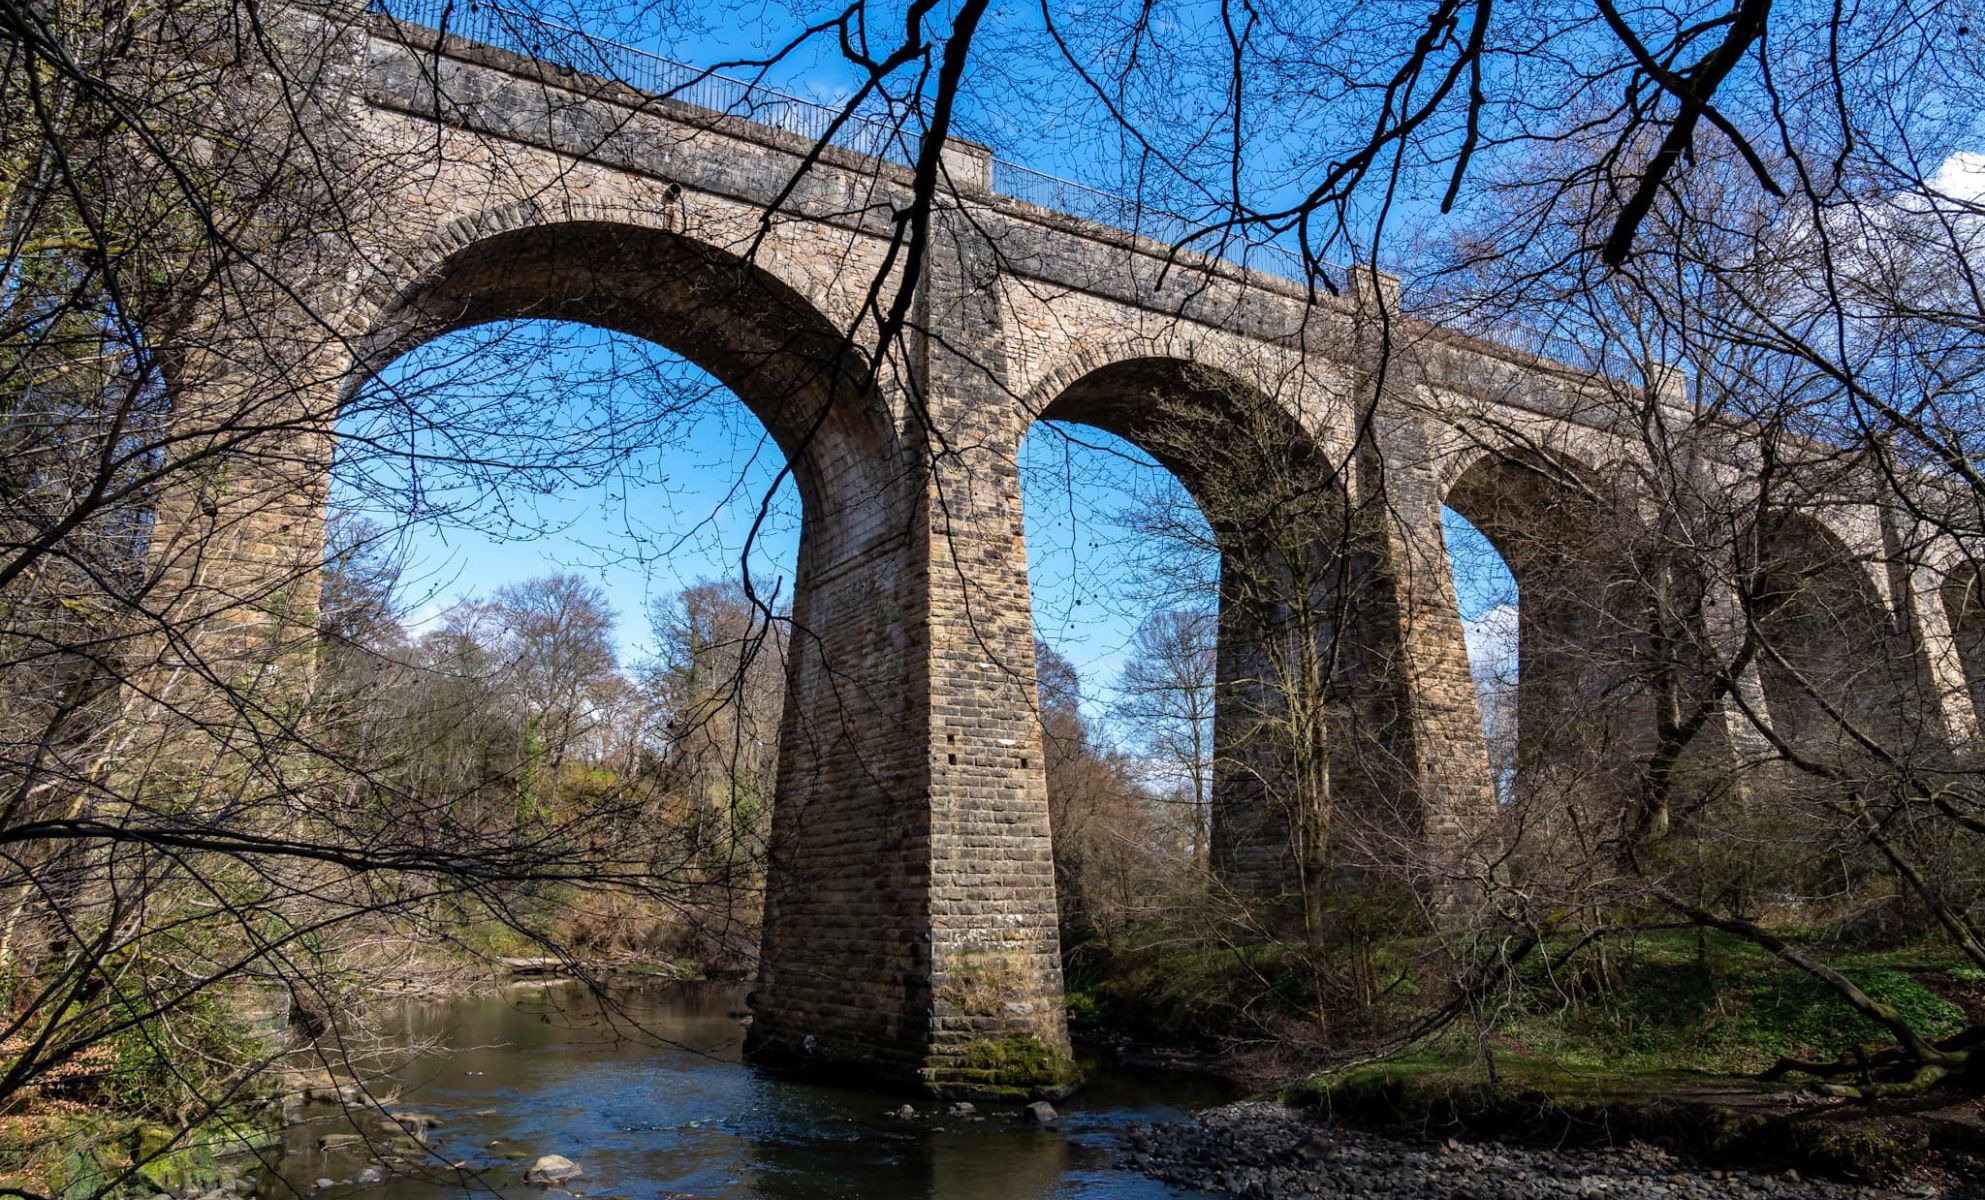 Avon River Aqueduct for Union Canal at Linlithgow